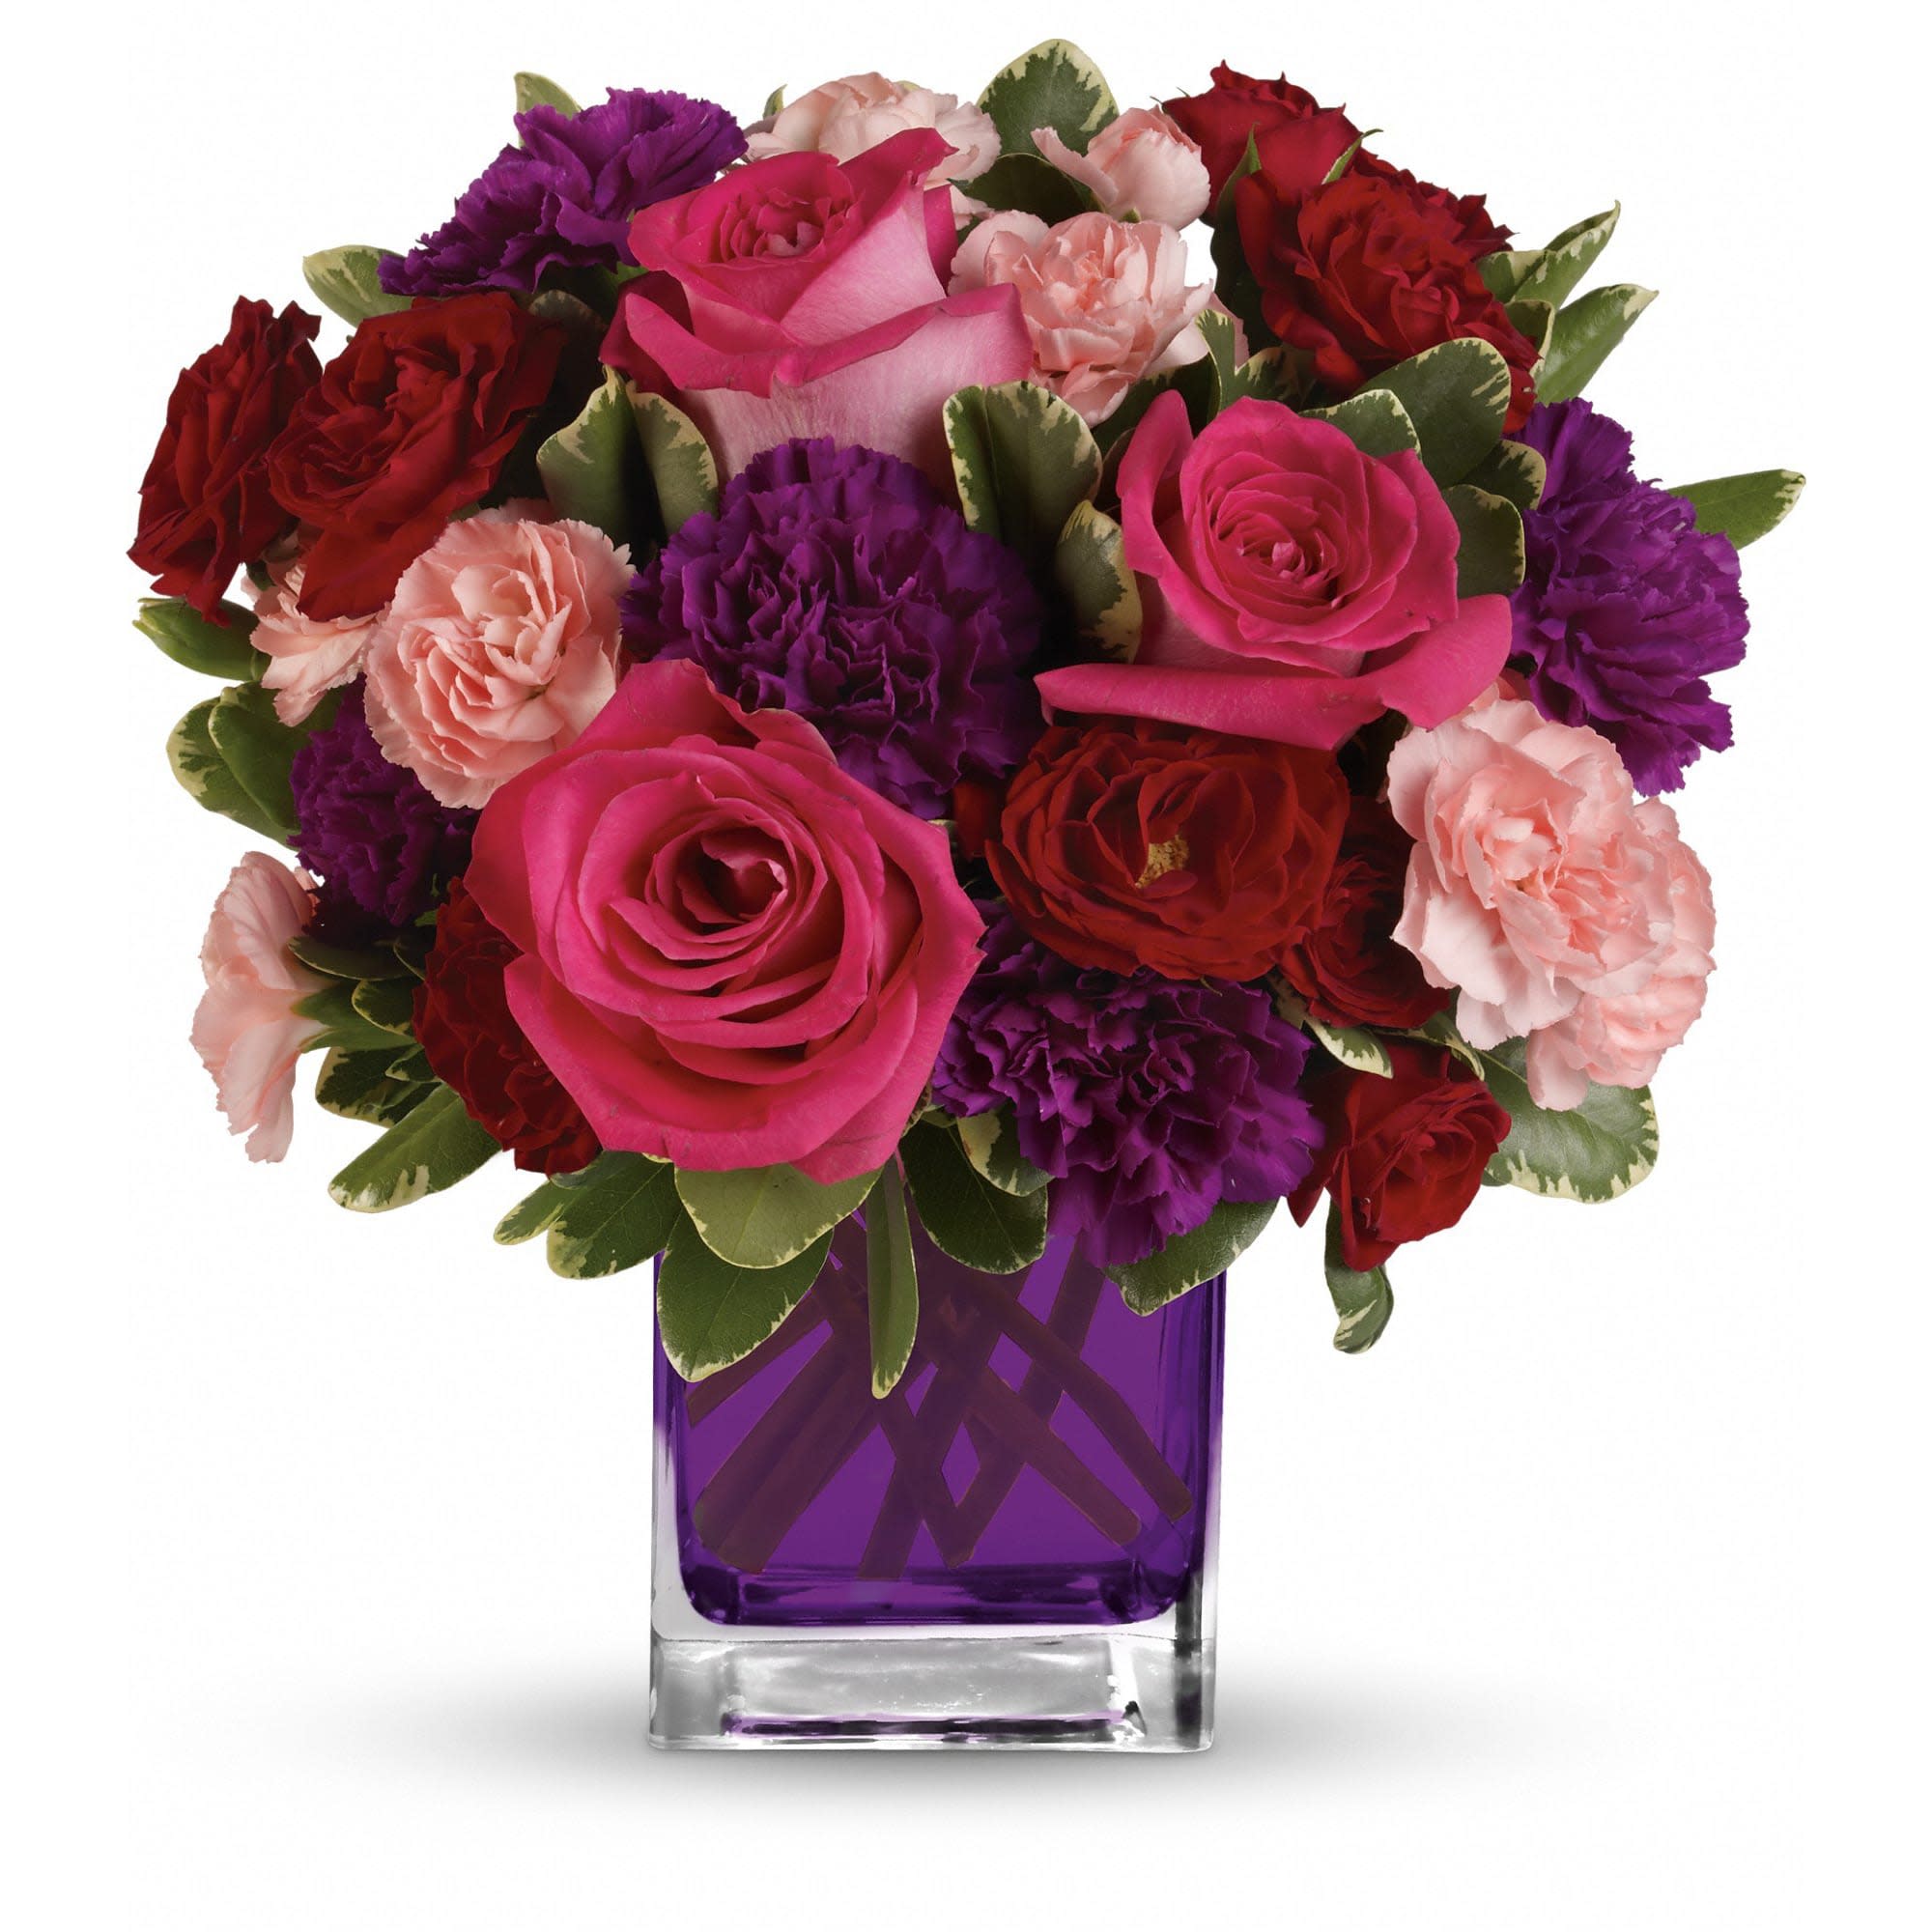 Bejeweled Beauty by Teleflora - Pure romance. Hot pink roses and dark red spray roses are brightly arranged inside our violet cube.    Hot pink roses, dark red spray roses, purple carnations and pink miniature carnations are accented with assorted greens. Delivered in Teleflora's glass violet cube.    Approximately 11 1/2&quot; W x 11 1/2&quot; H    Orientation: One-Sided    As Shown : TEV19-1A  Deluxe : TEV19-1B  Premium : TEV19-1C